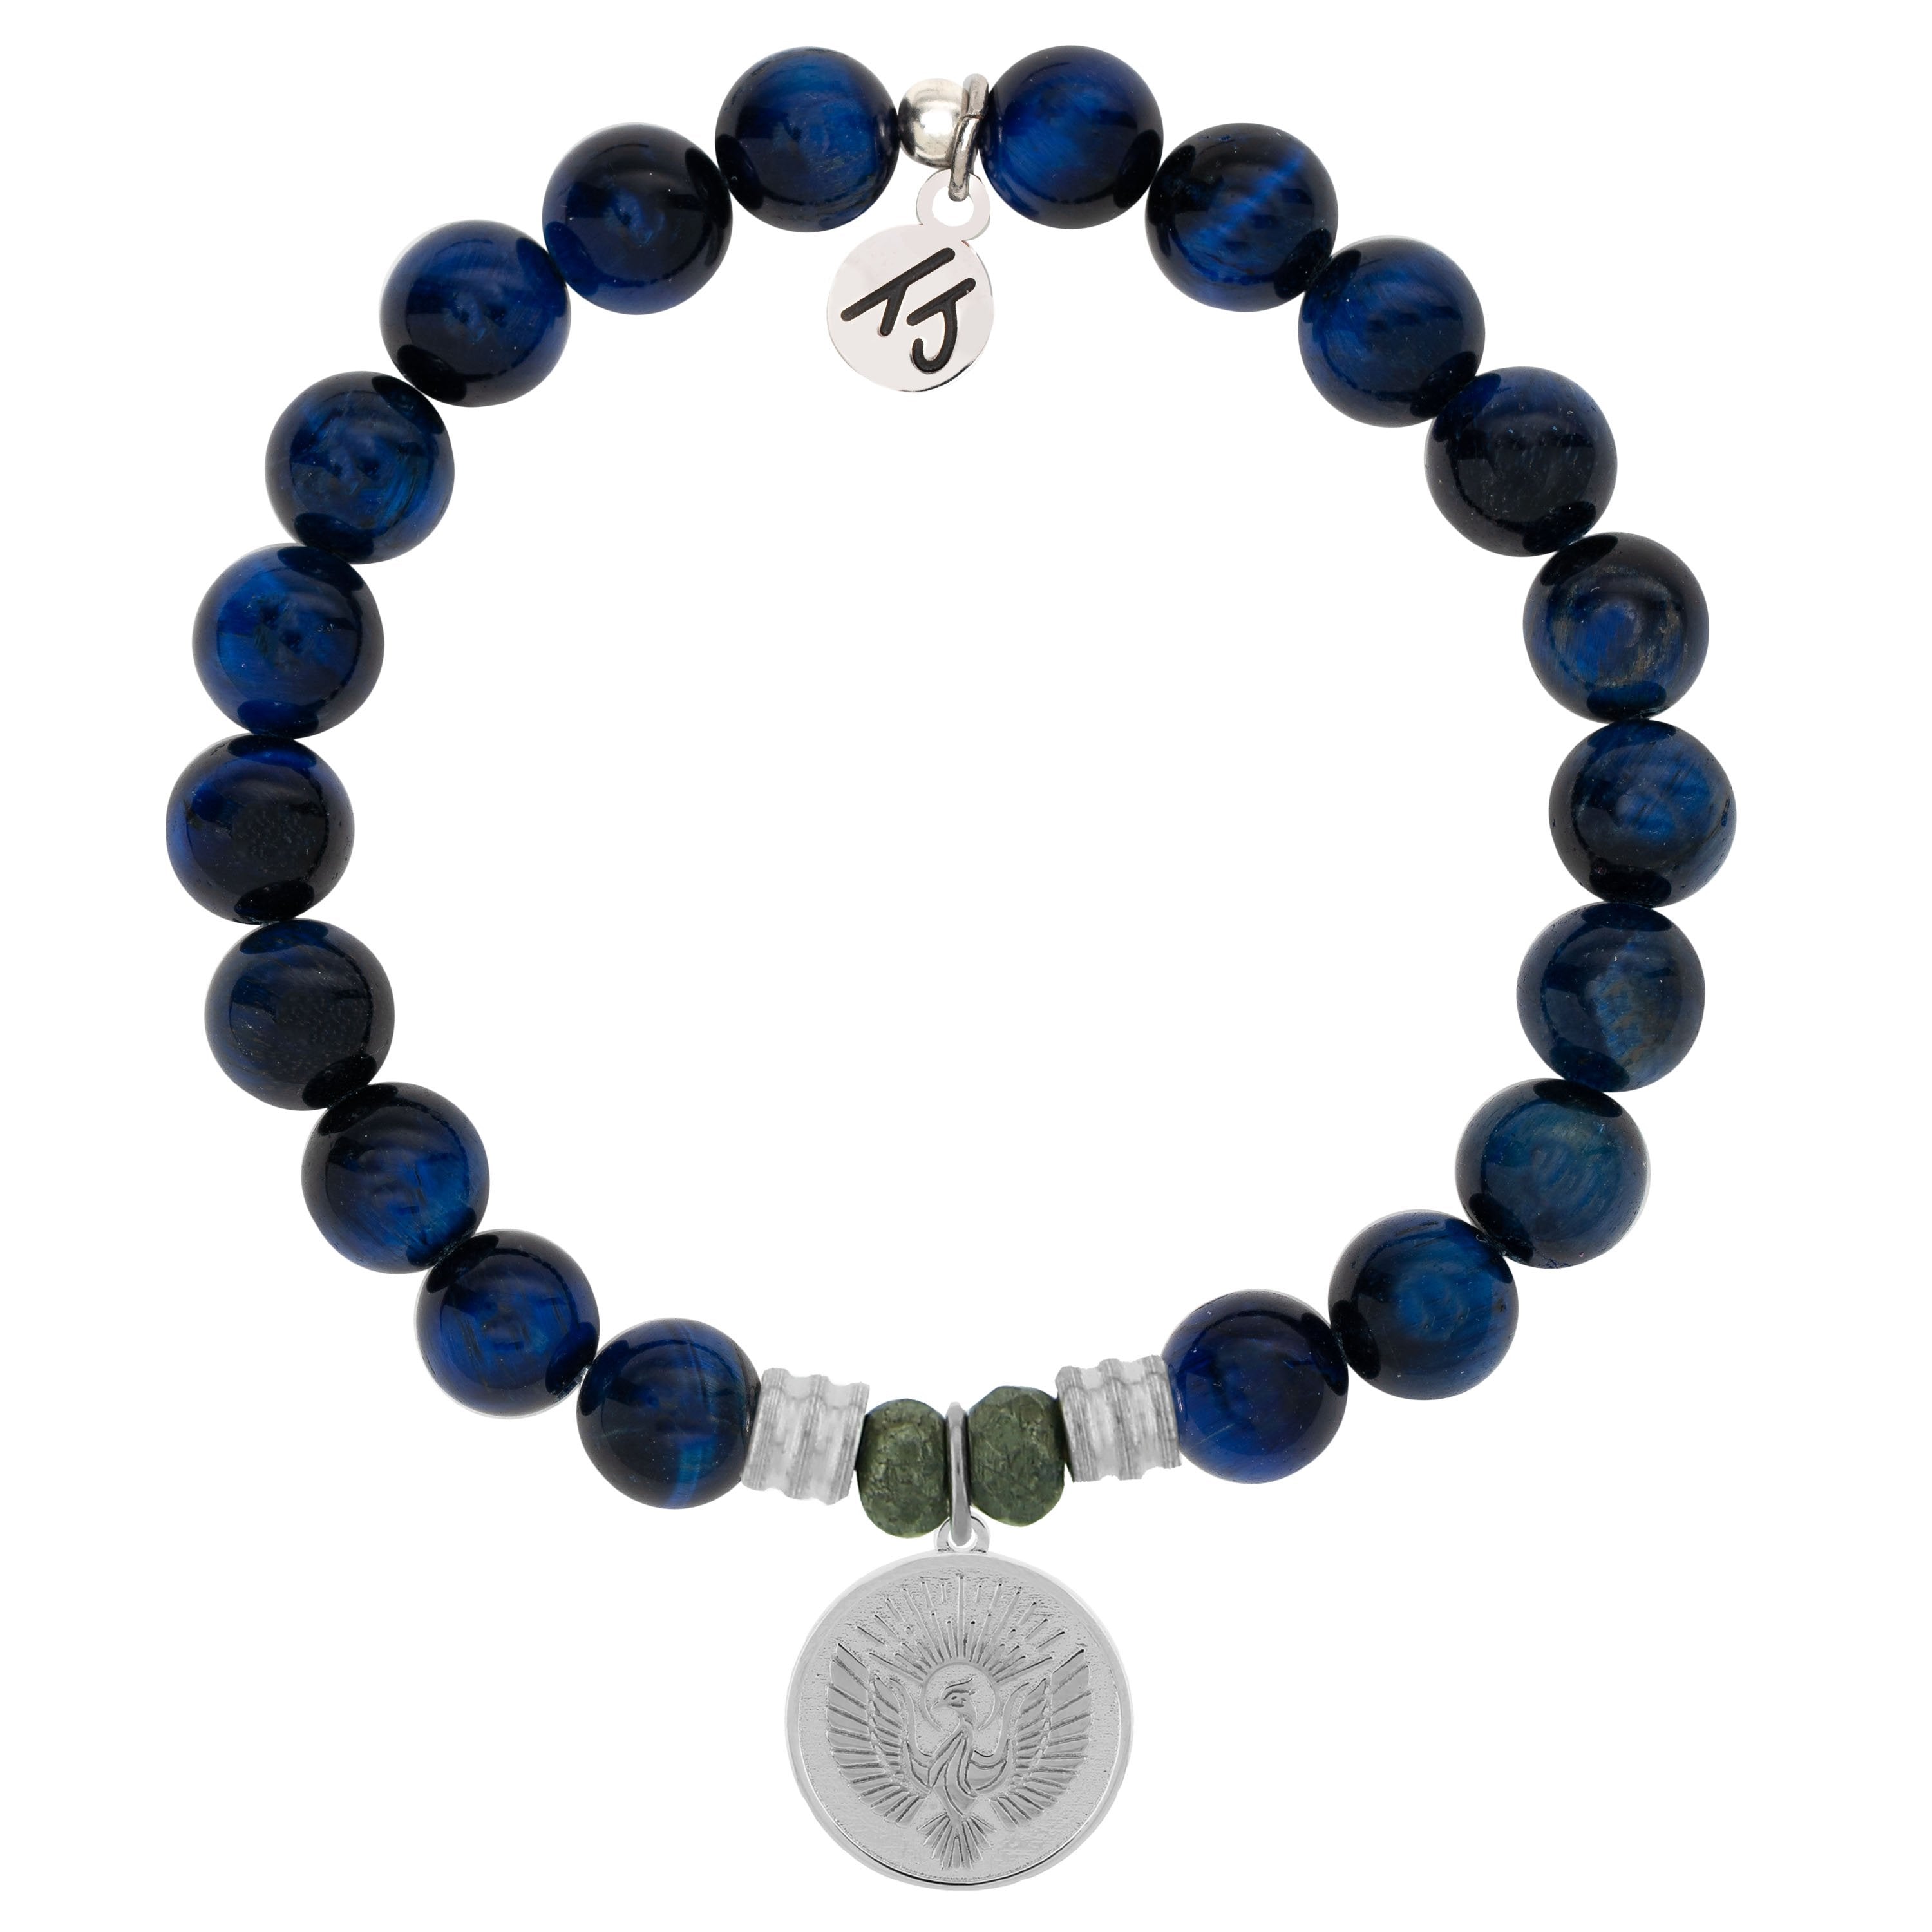 Personalized Mens Gemstone Bracelet for Protection, Grounding and Energy |  Ncs Jewelry Art